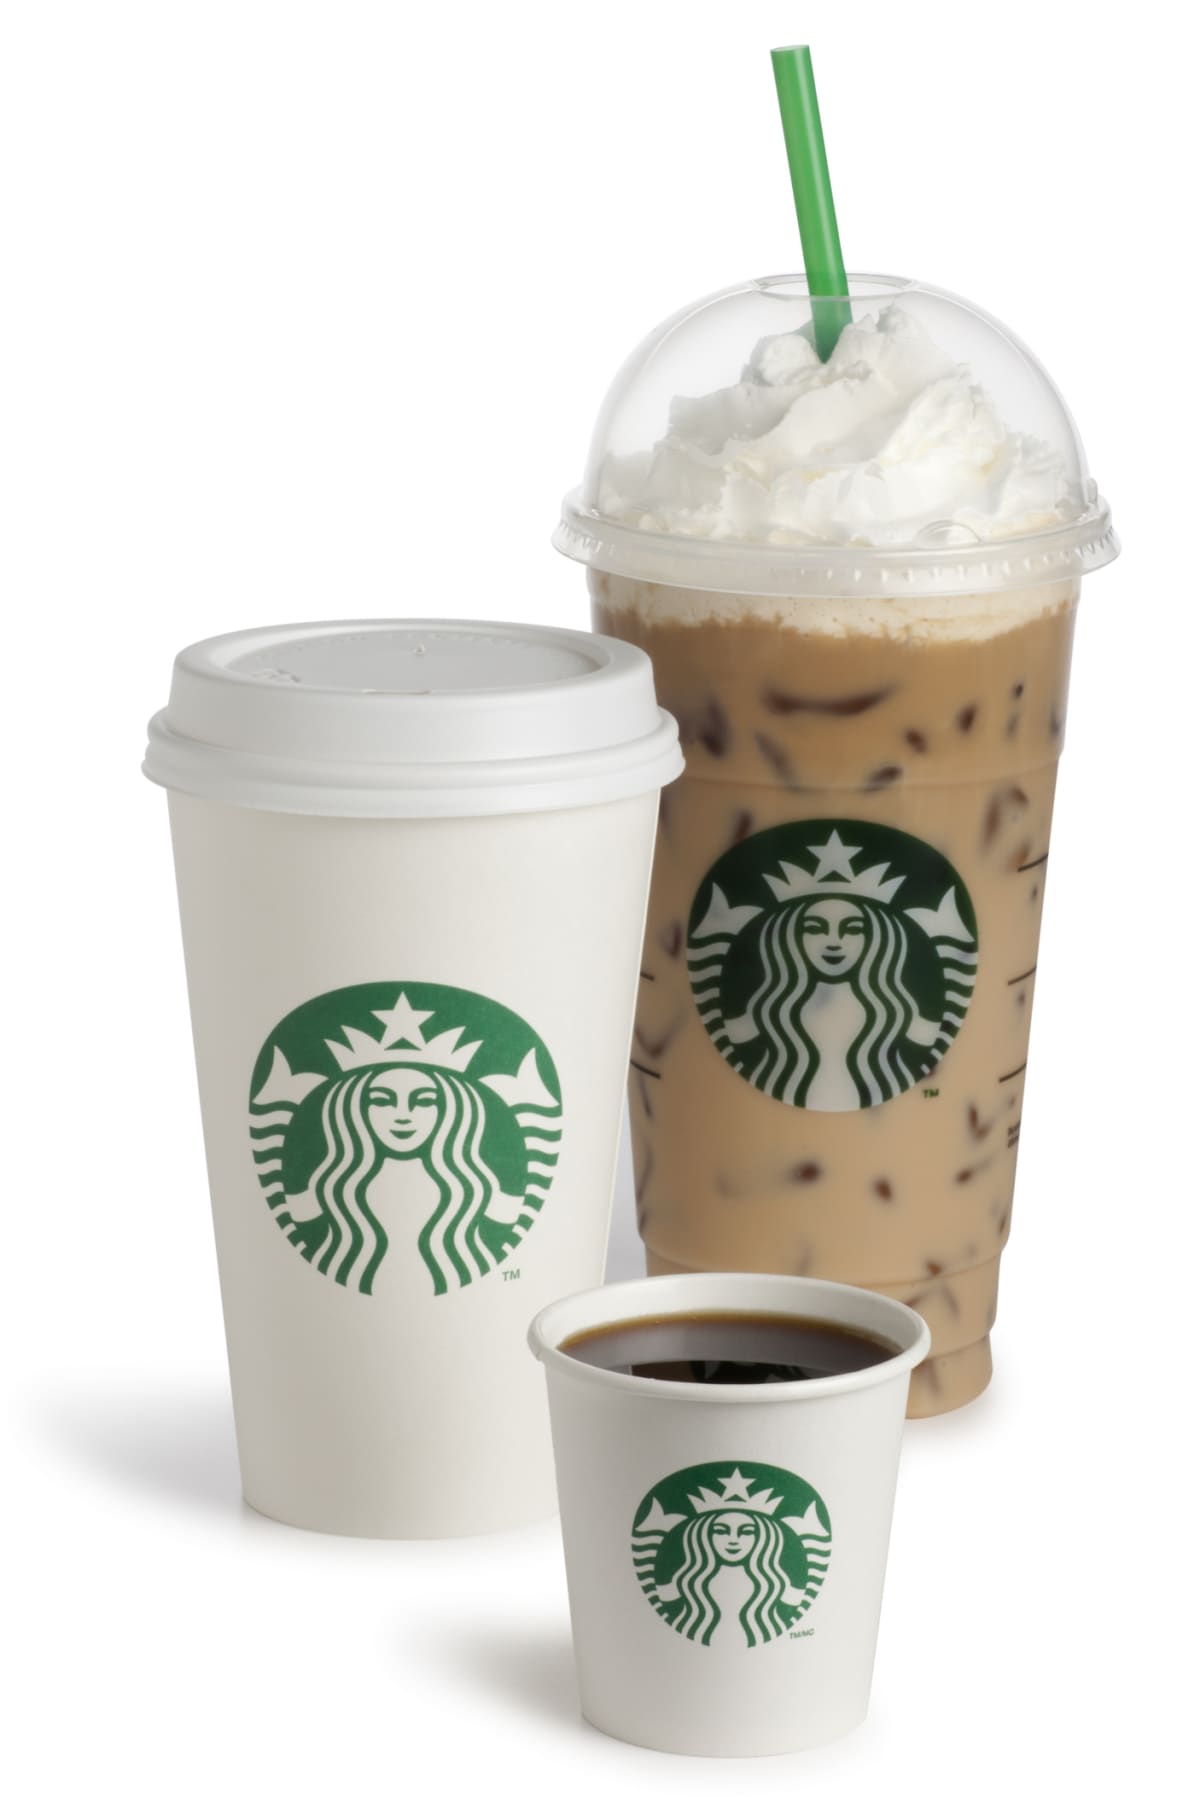 starbucks drinks, both hot and cold drinks